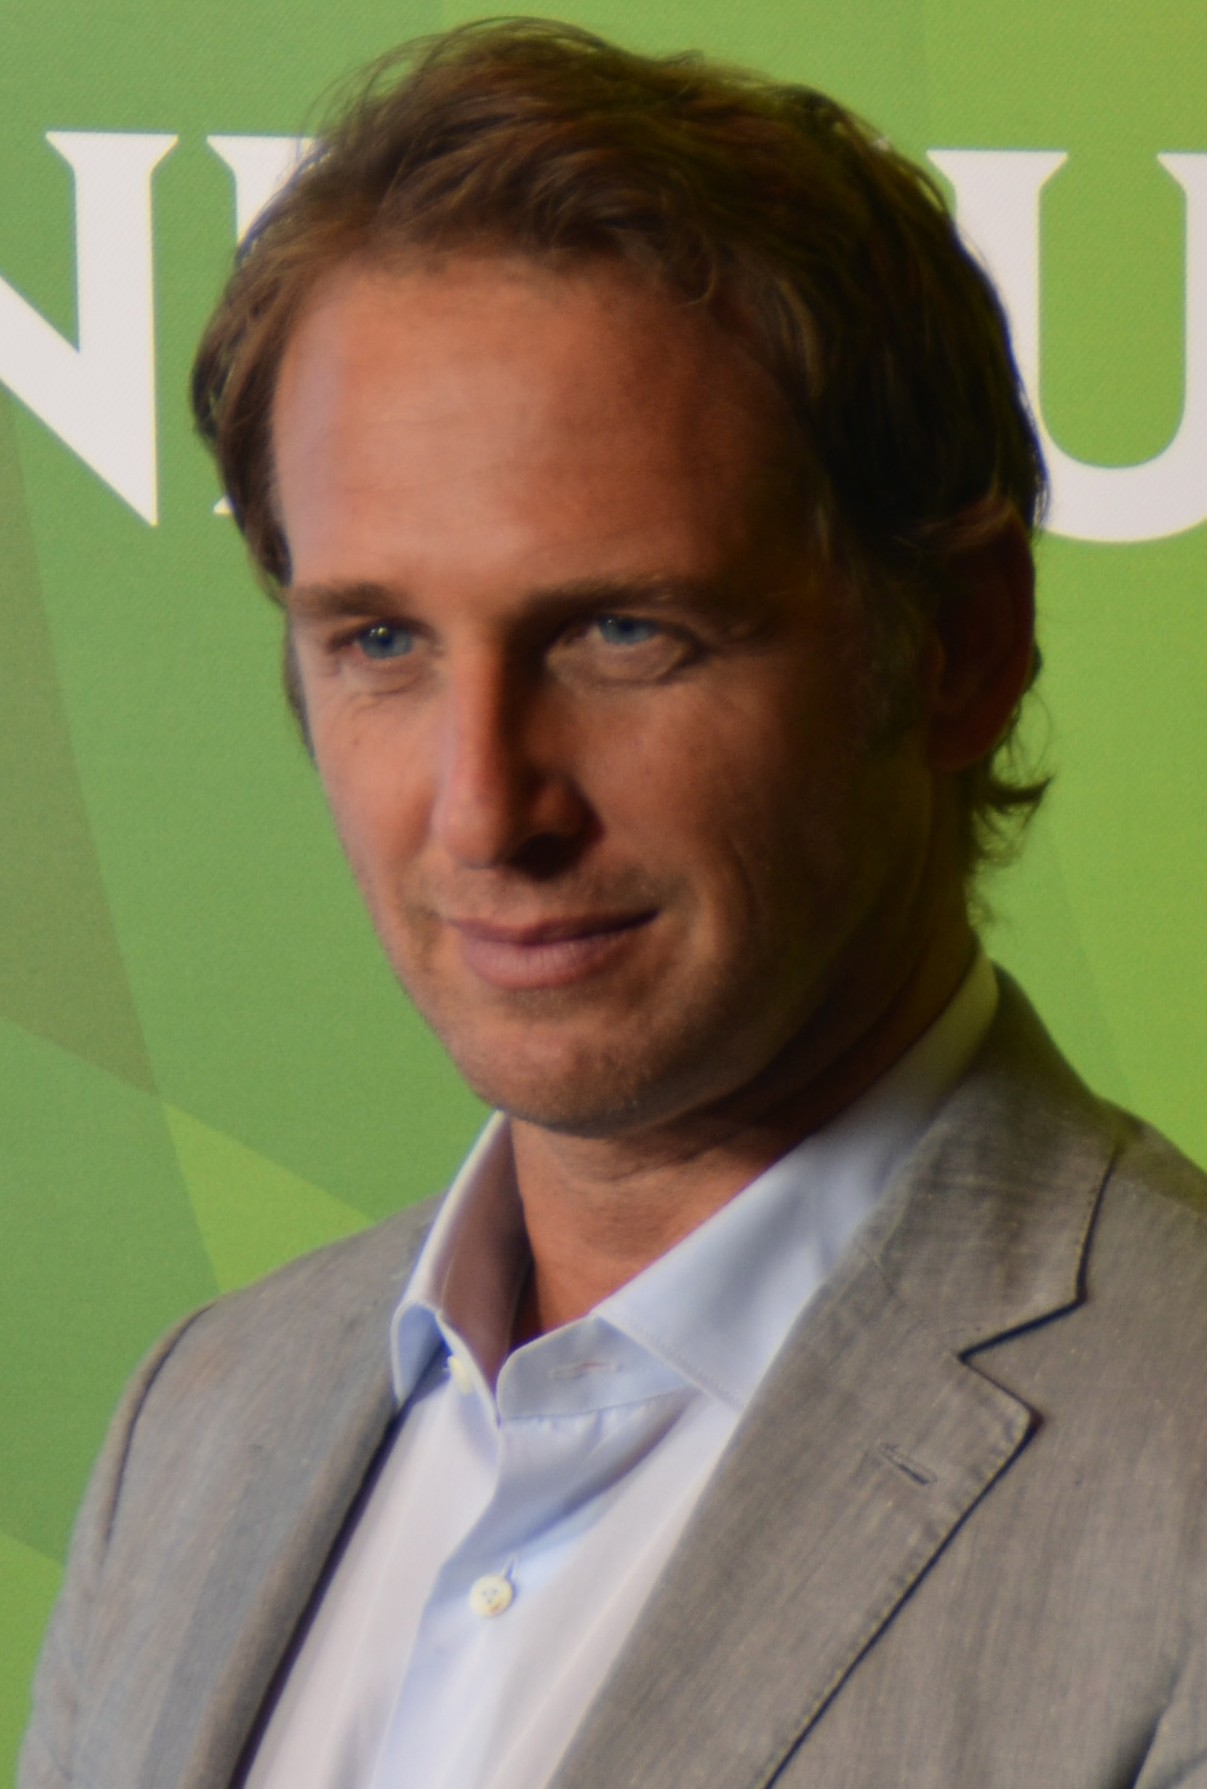 The 52-year old son of father Don Maurer and mother Michele  LeFevre Josh Lucas in 2024 photo. Josh Lucas earned a  million dollar salary - leaving the net worth at 16 million in 2024